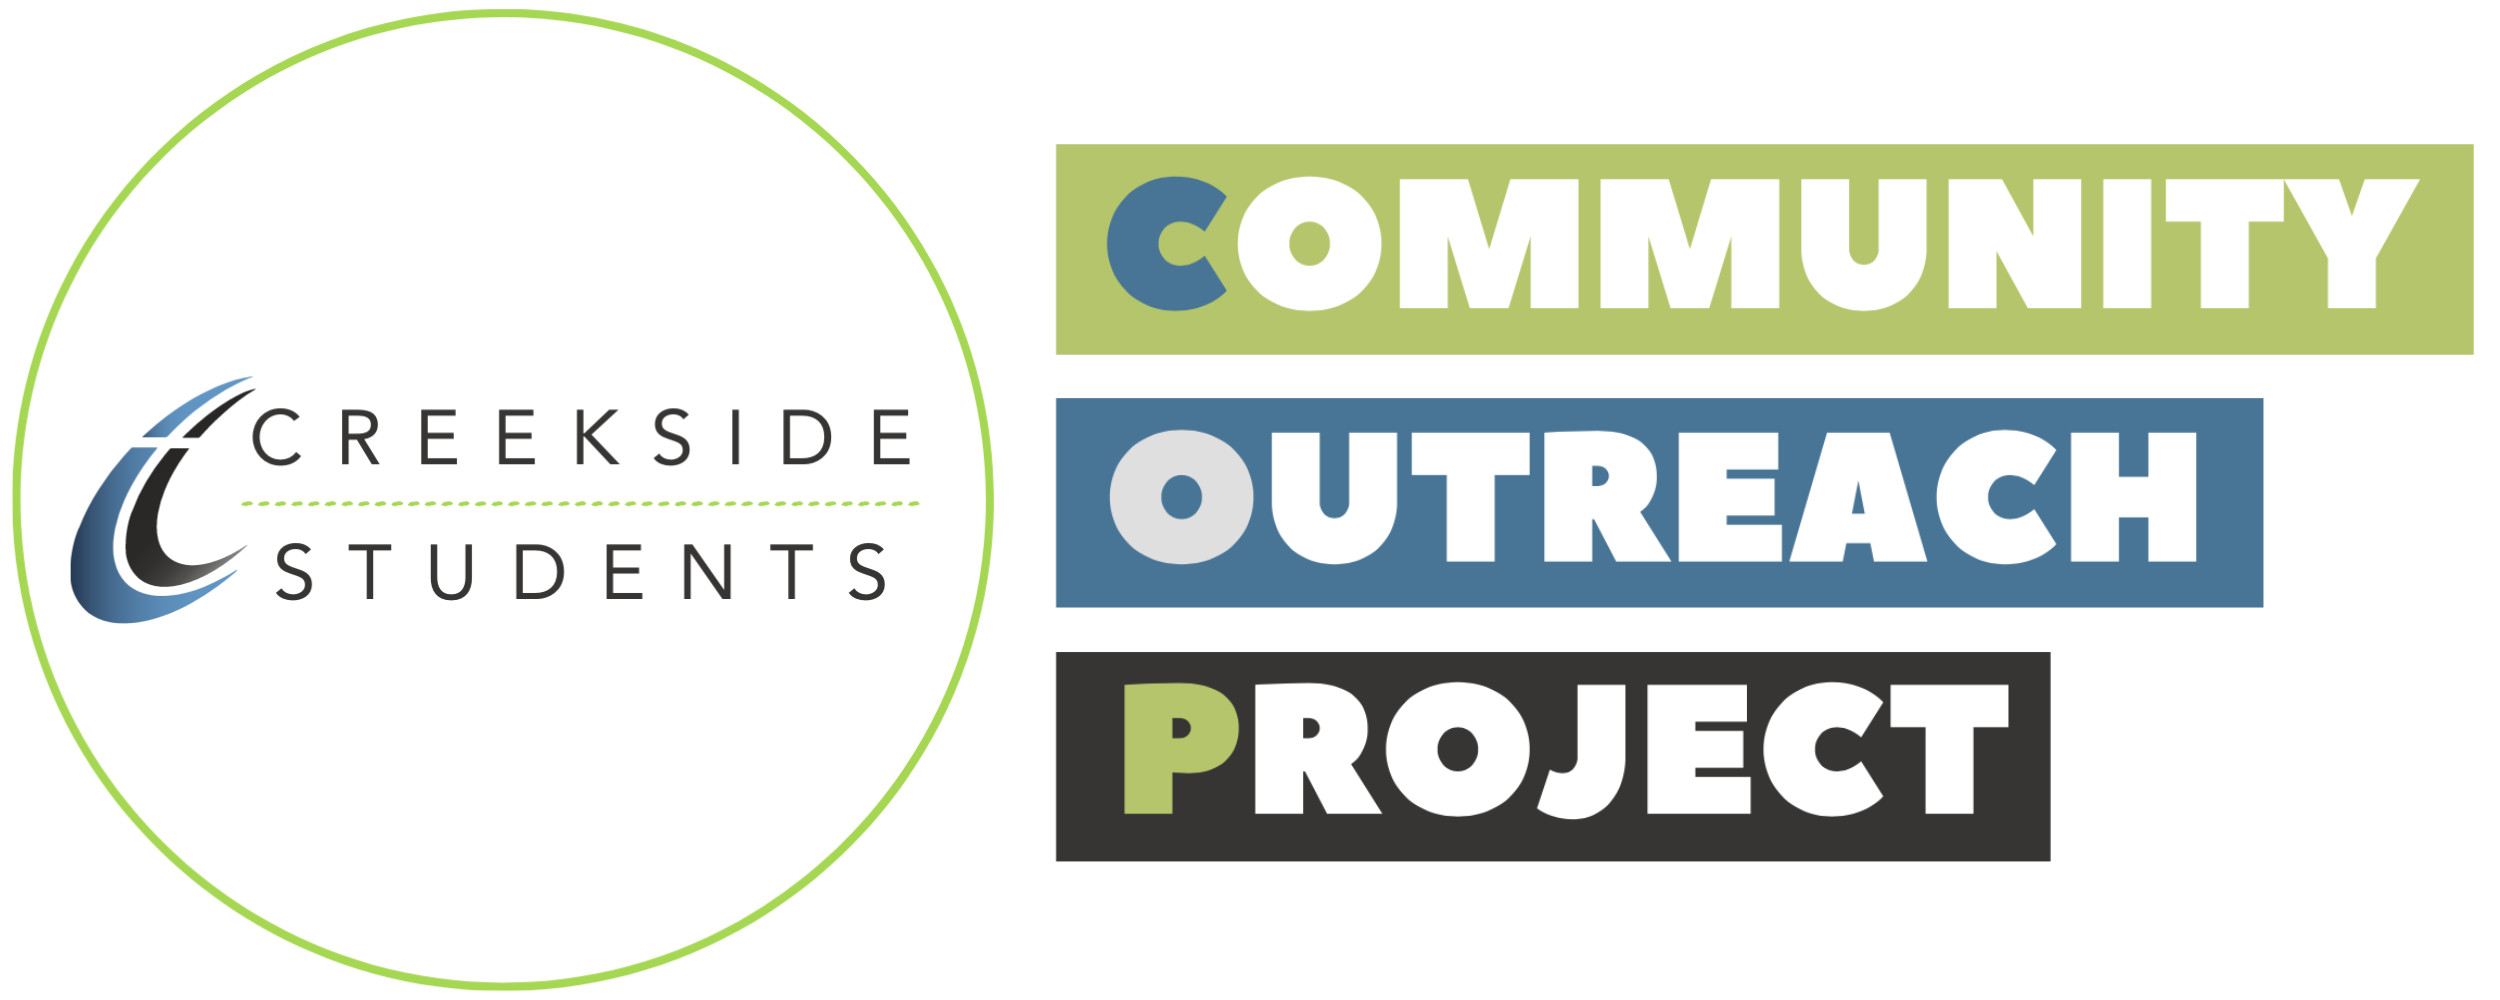 Creekside Chuch Student Ministry: Community Outreach Project